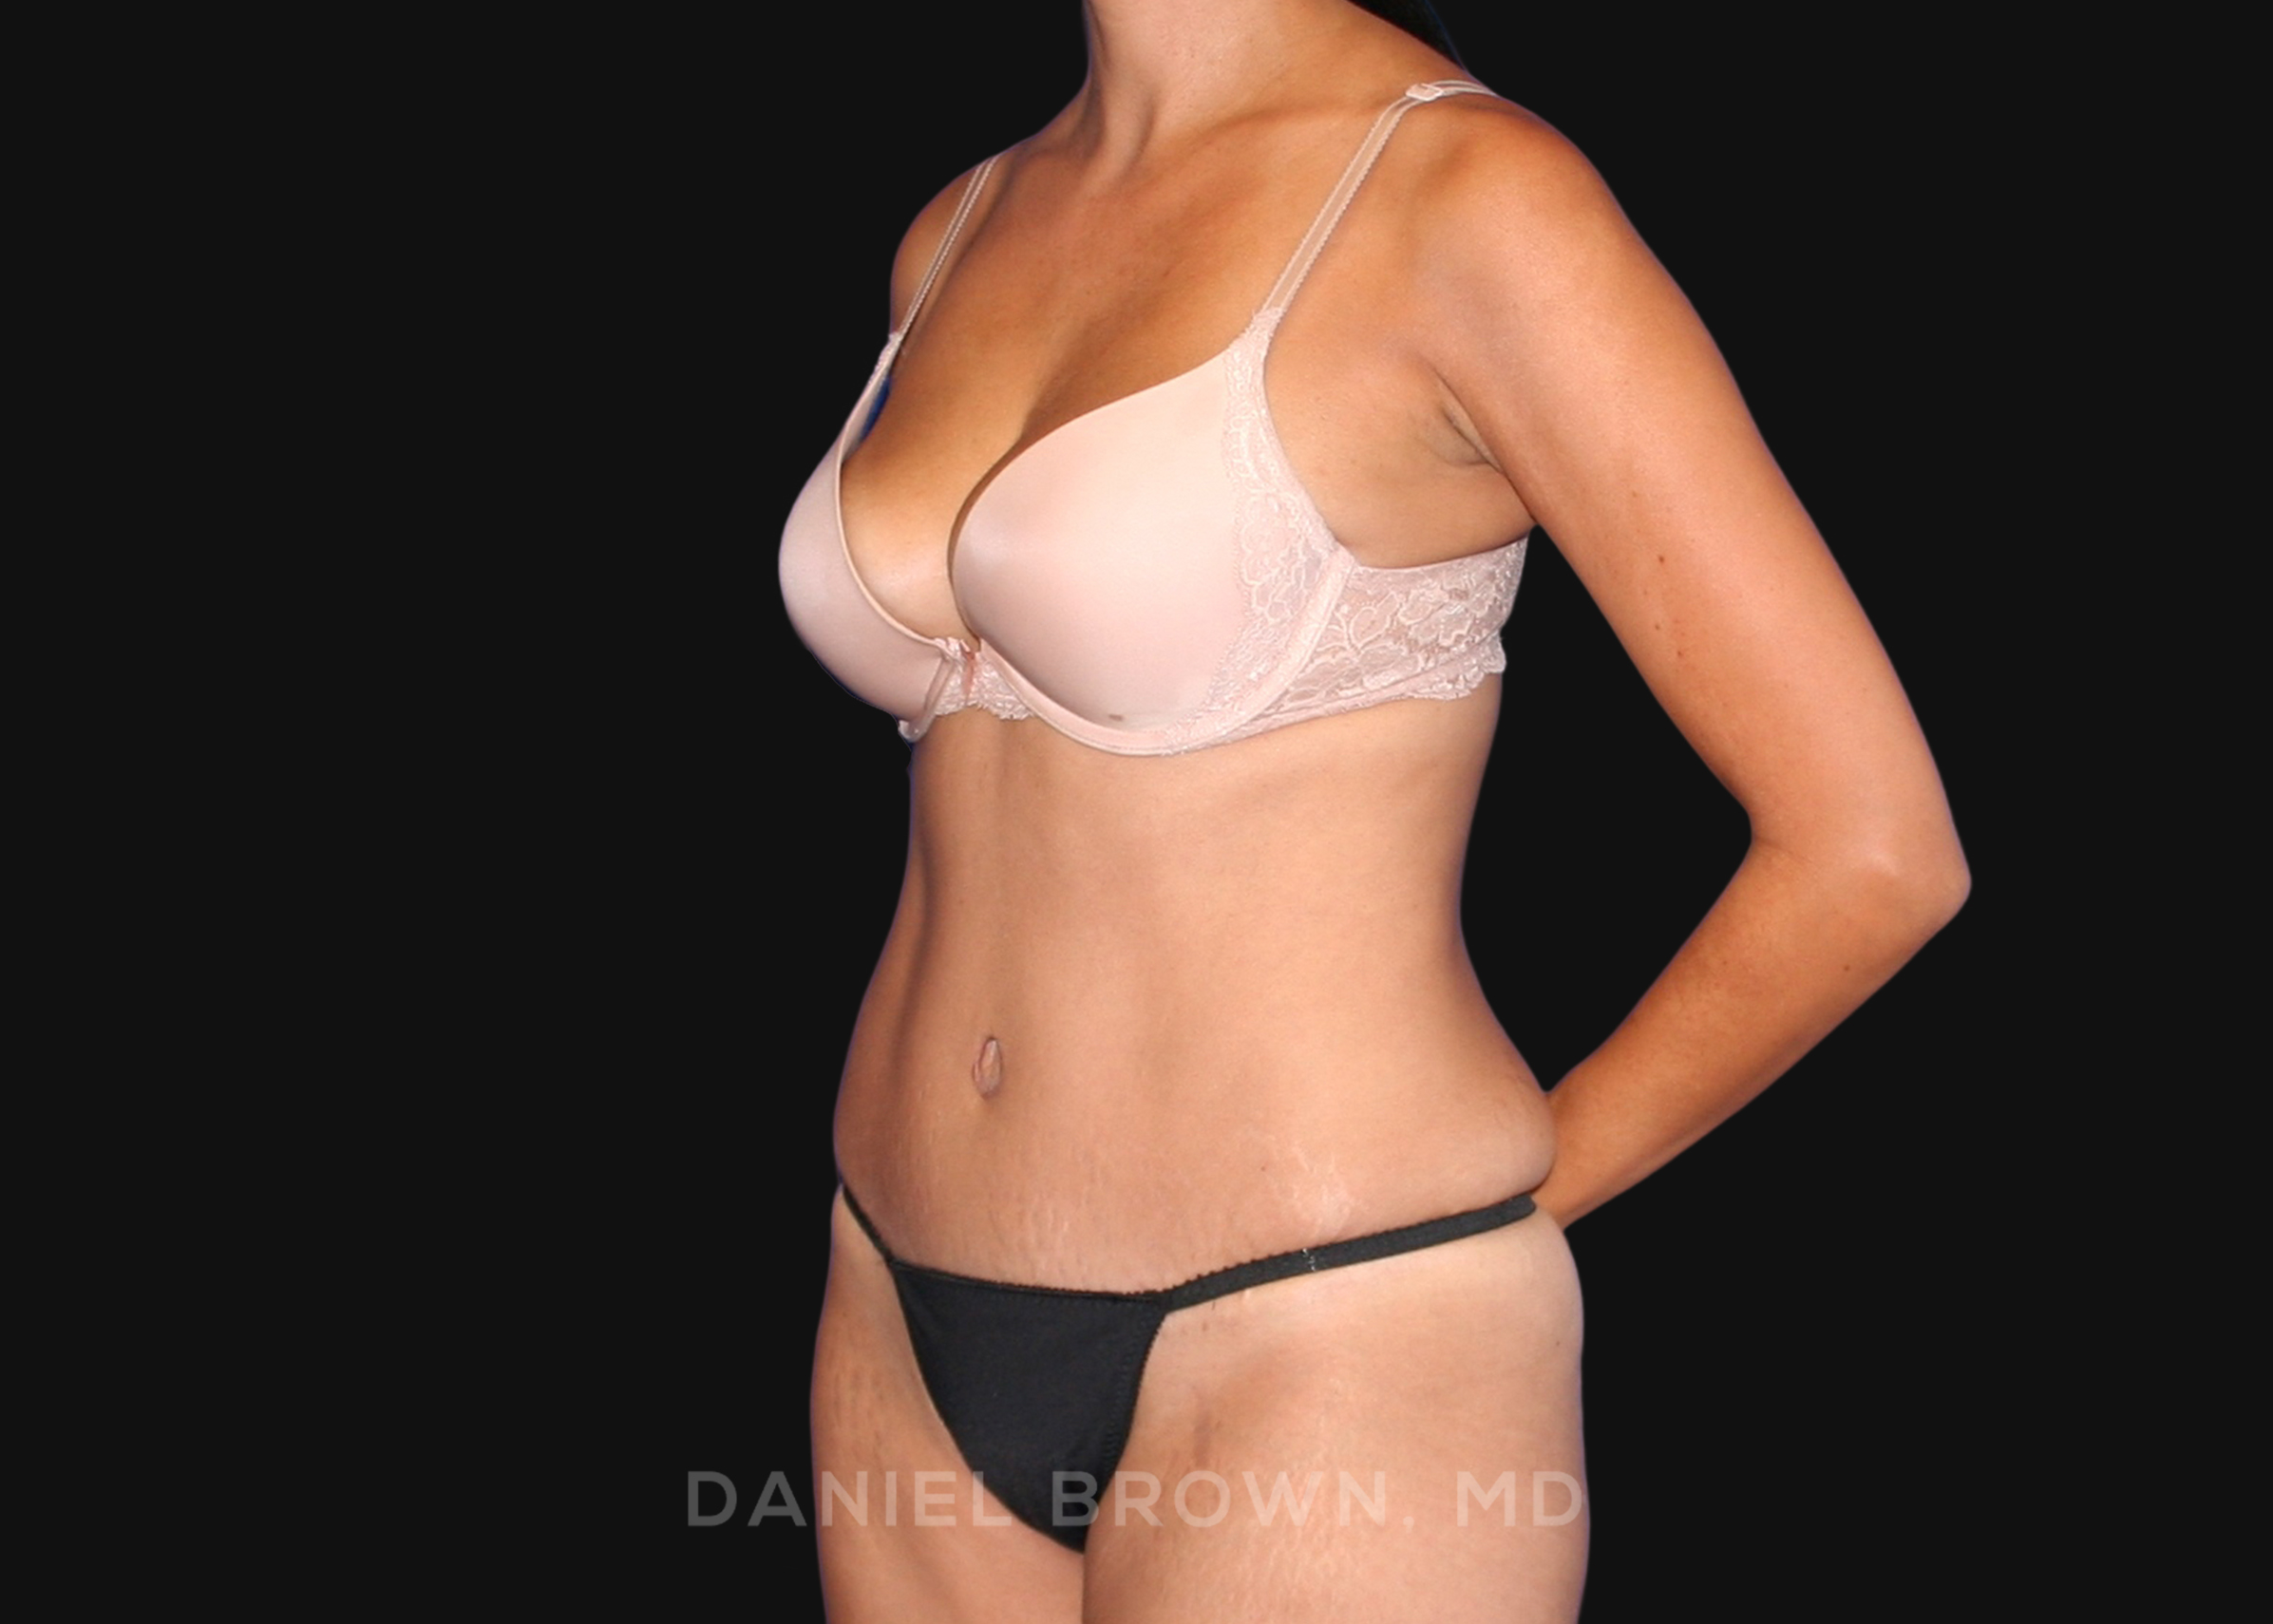 Tummy Tuck Patient Photo - Case 1090 - after view